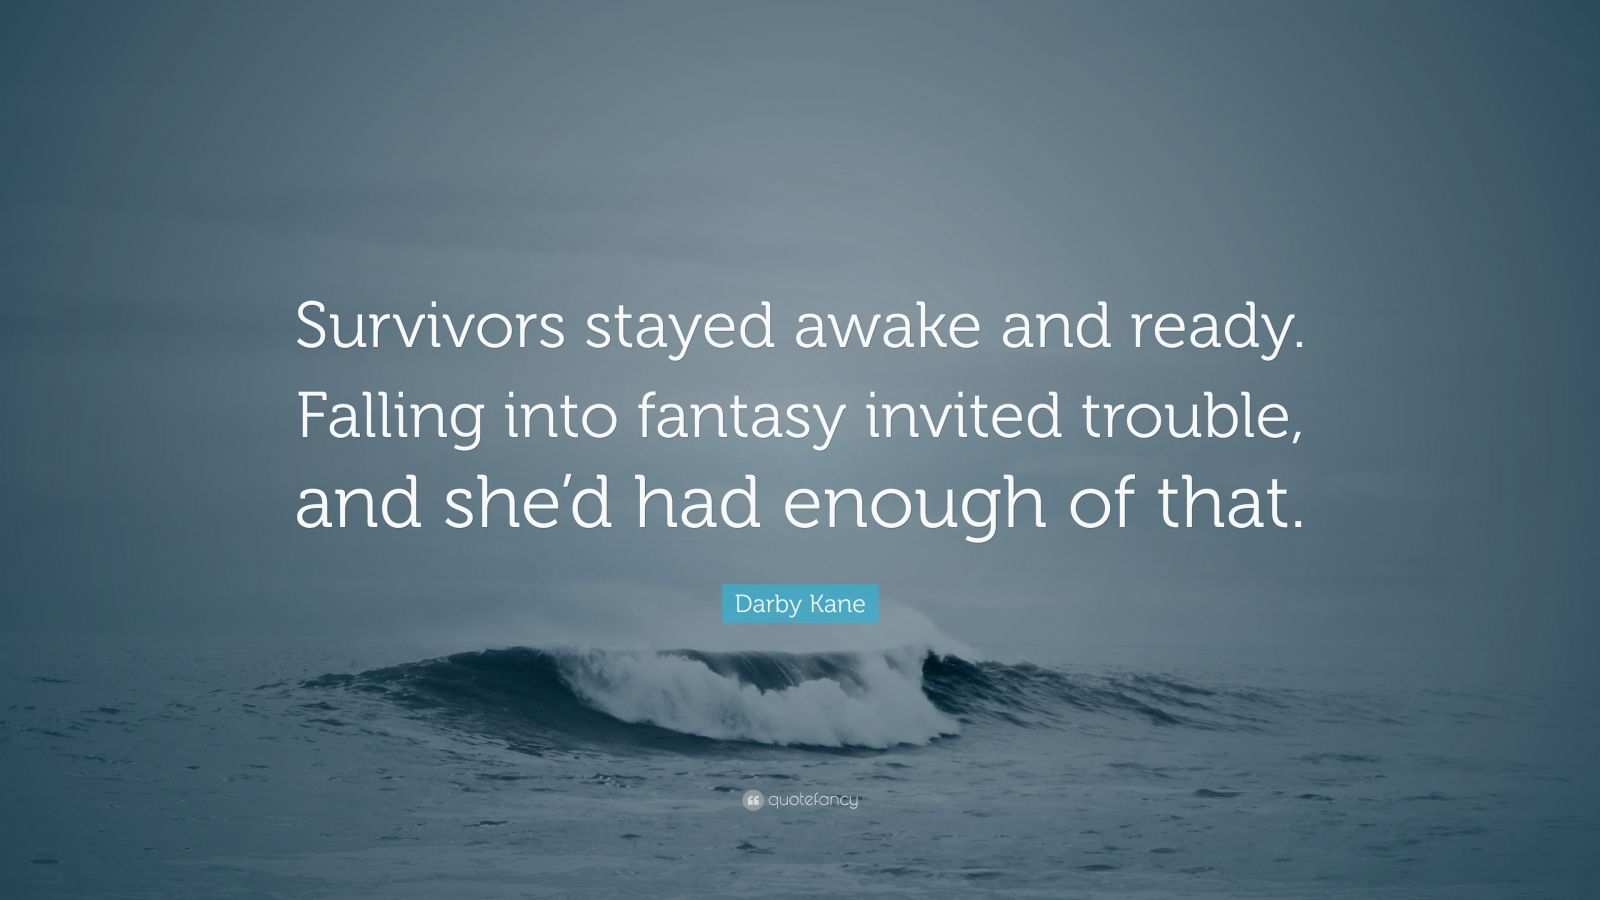 Darby Kane Quote: “Survivors stayed awake and ready. Falling into ...